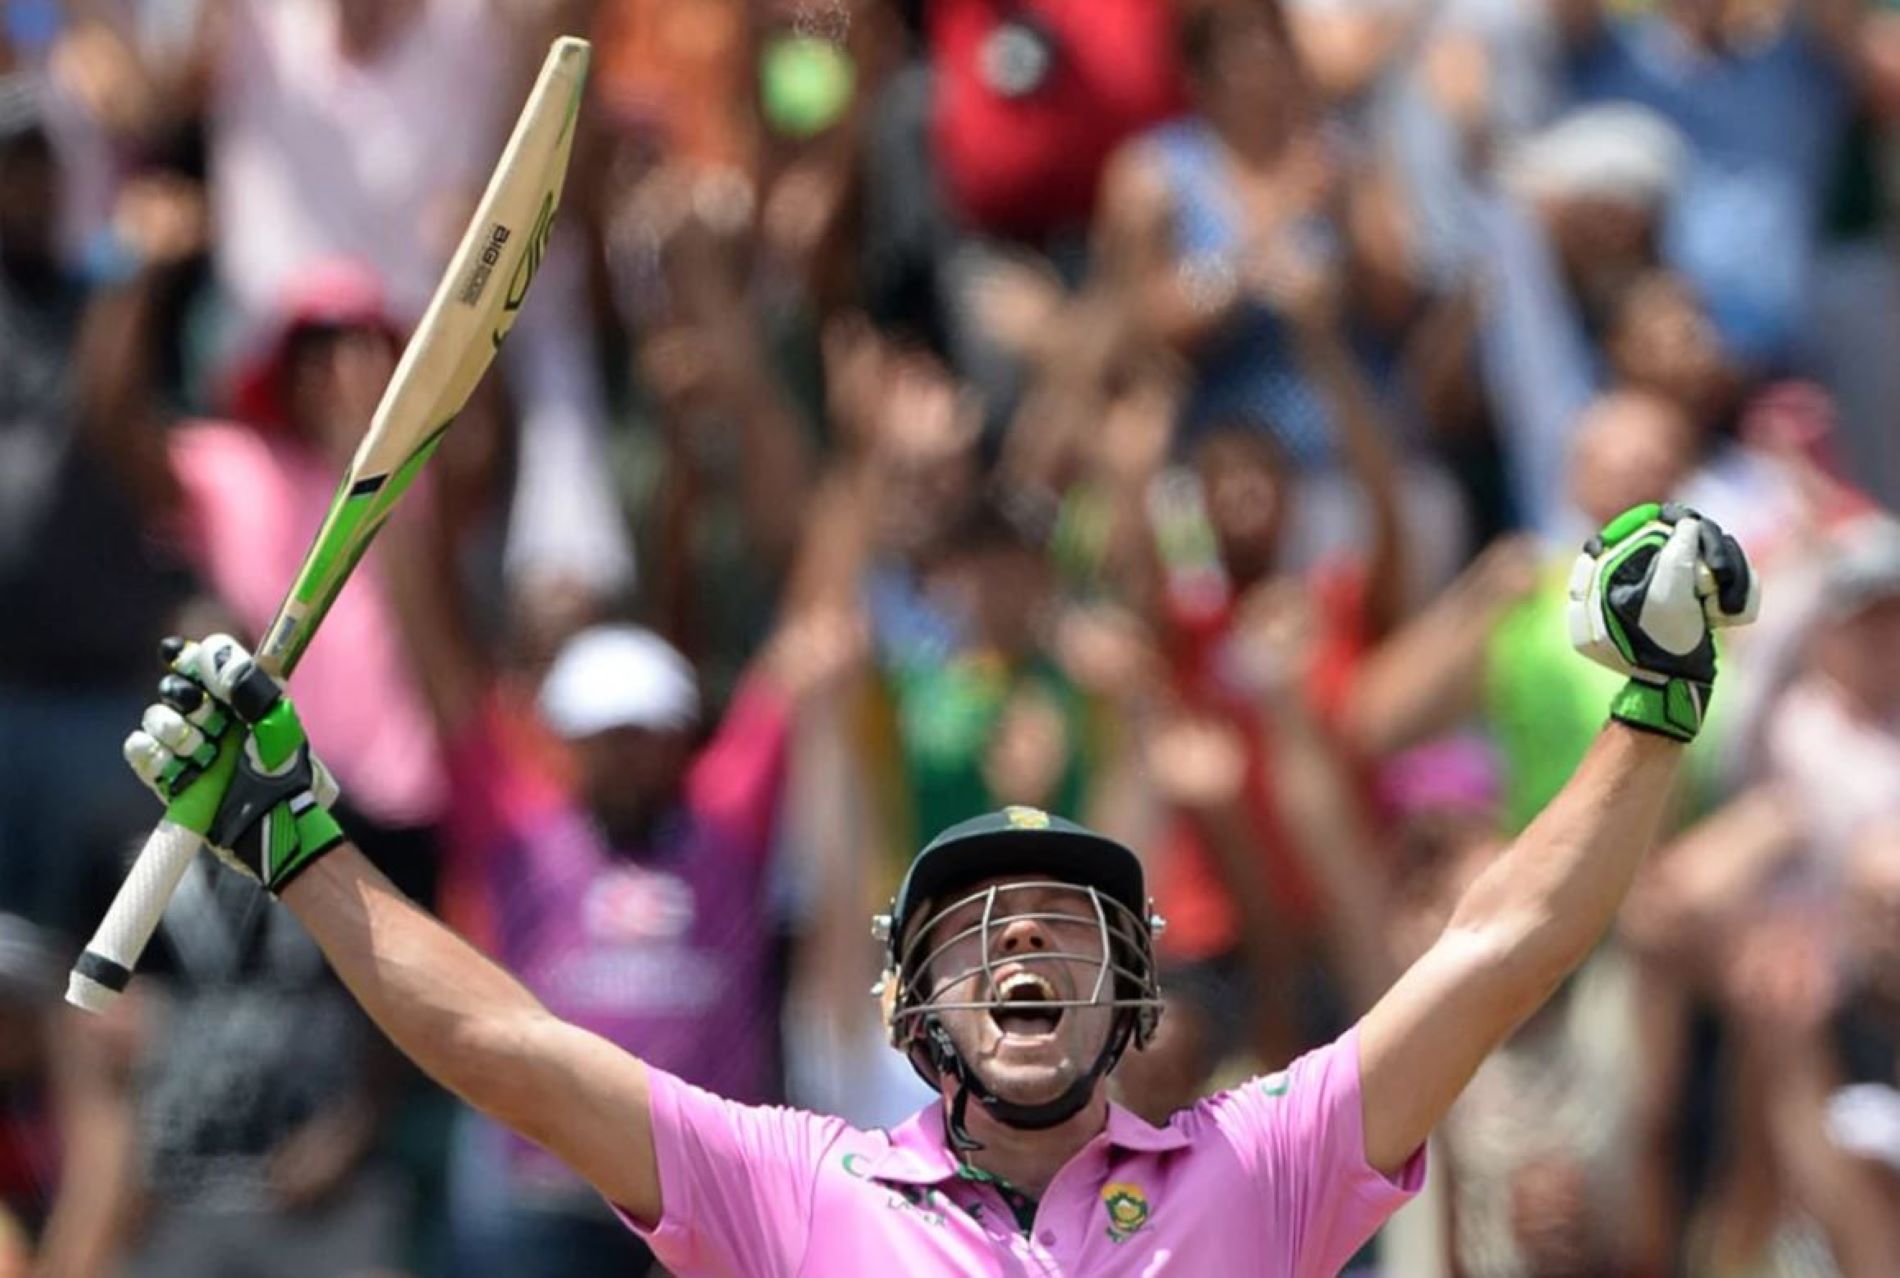 AB de Villiers scored one of the most memorable centuries in ODI history.